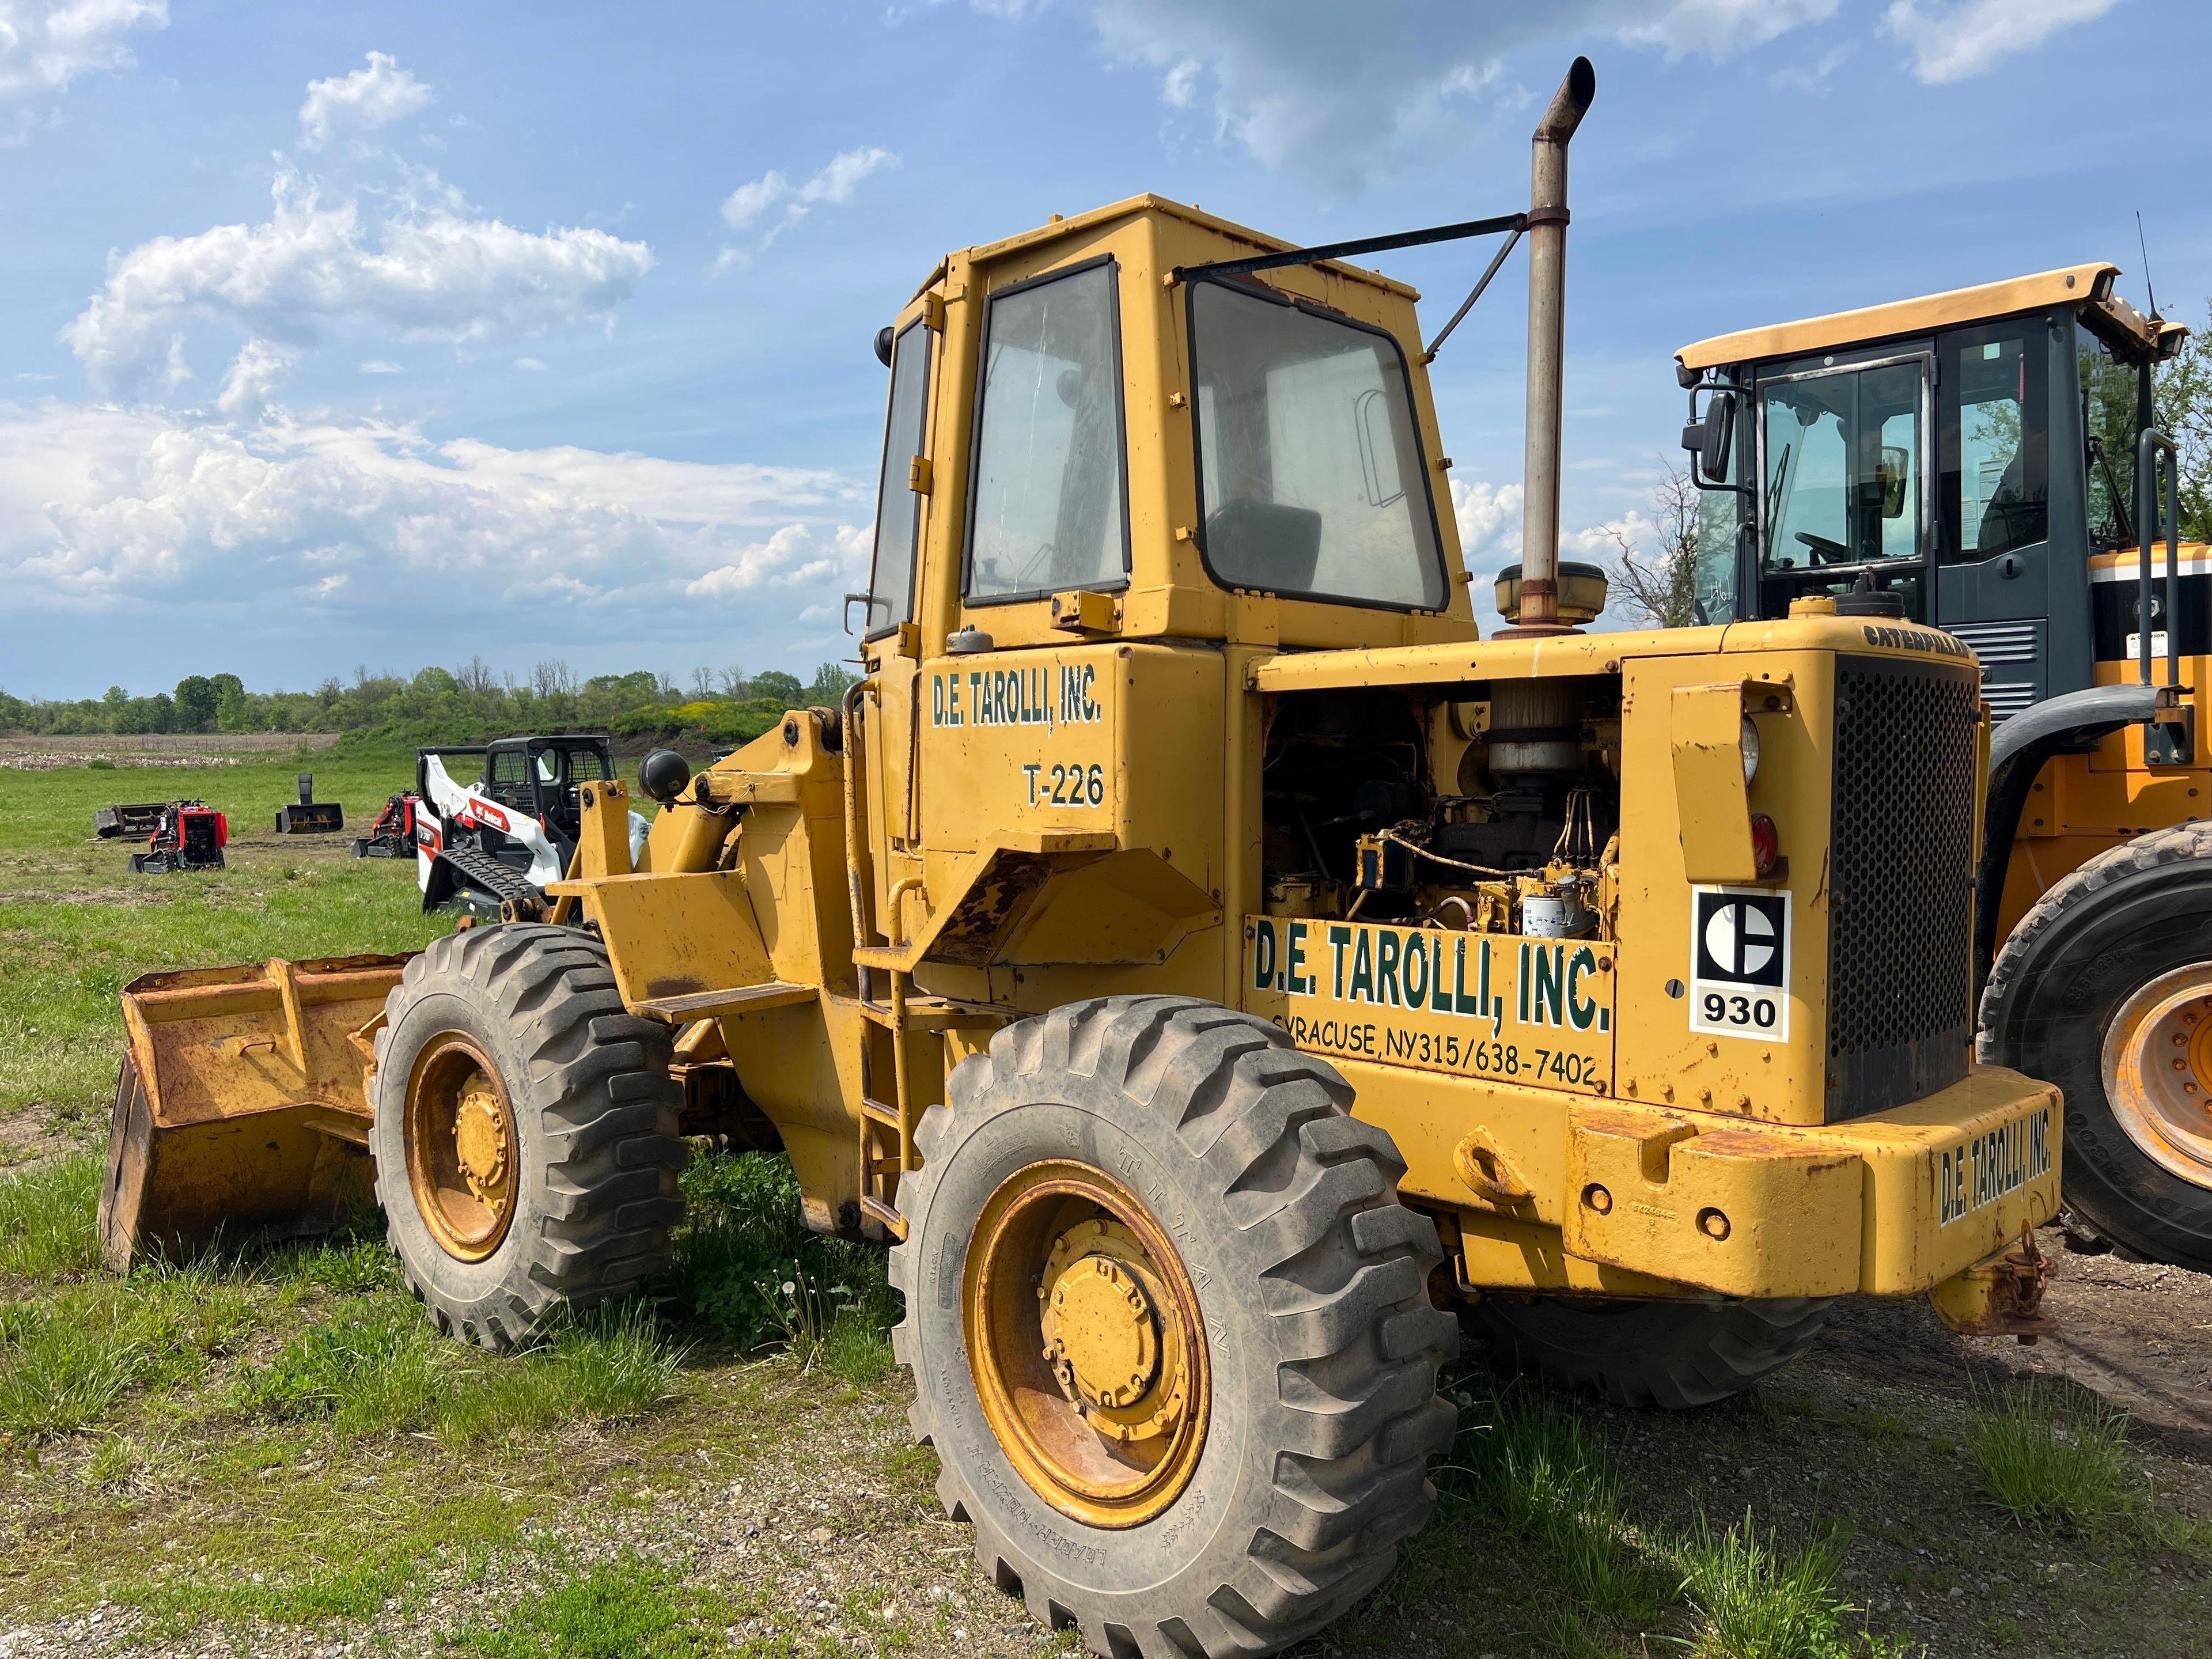 CAT 930 RUBBER TIRED LOADER SN:41K9301 powered by Cat 3304 diesel engine, equipped with EROPS, 3rd